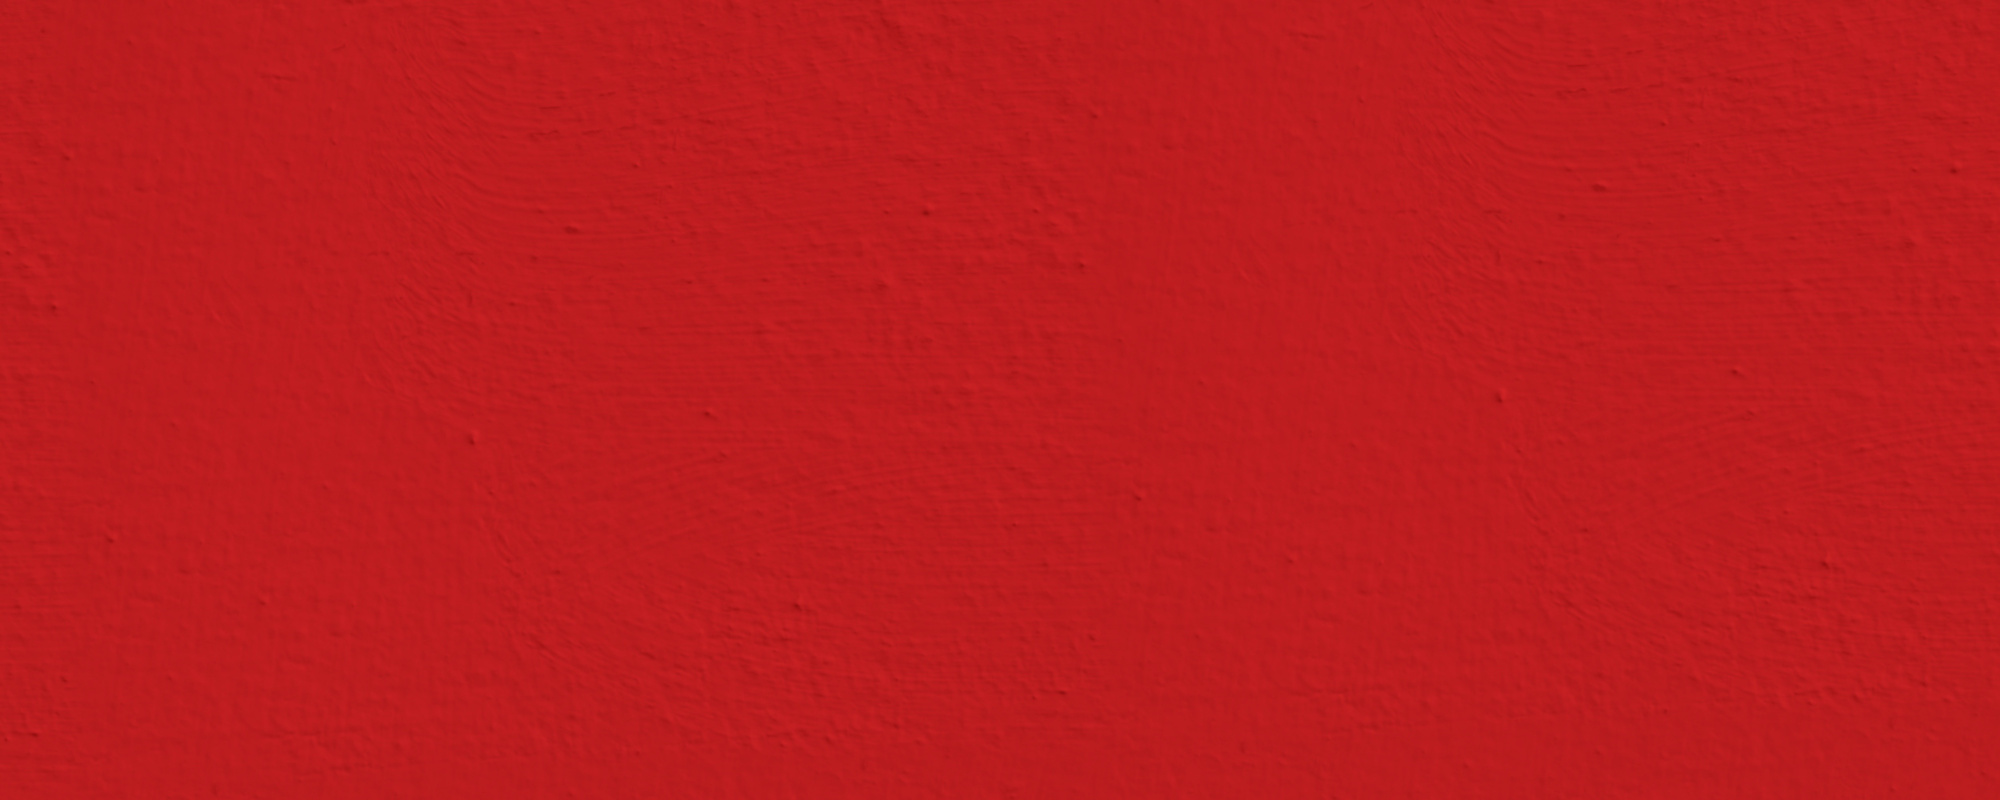 Red Emulsion wall paint texture rectangle background